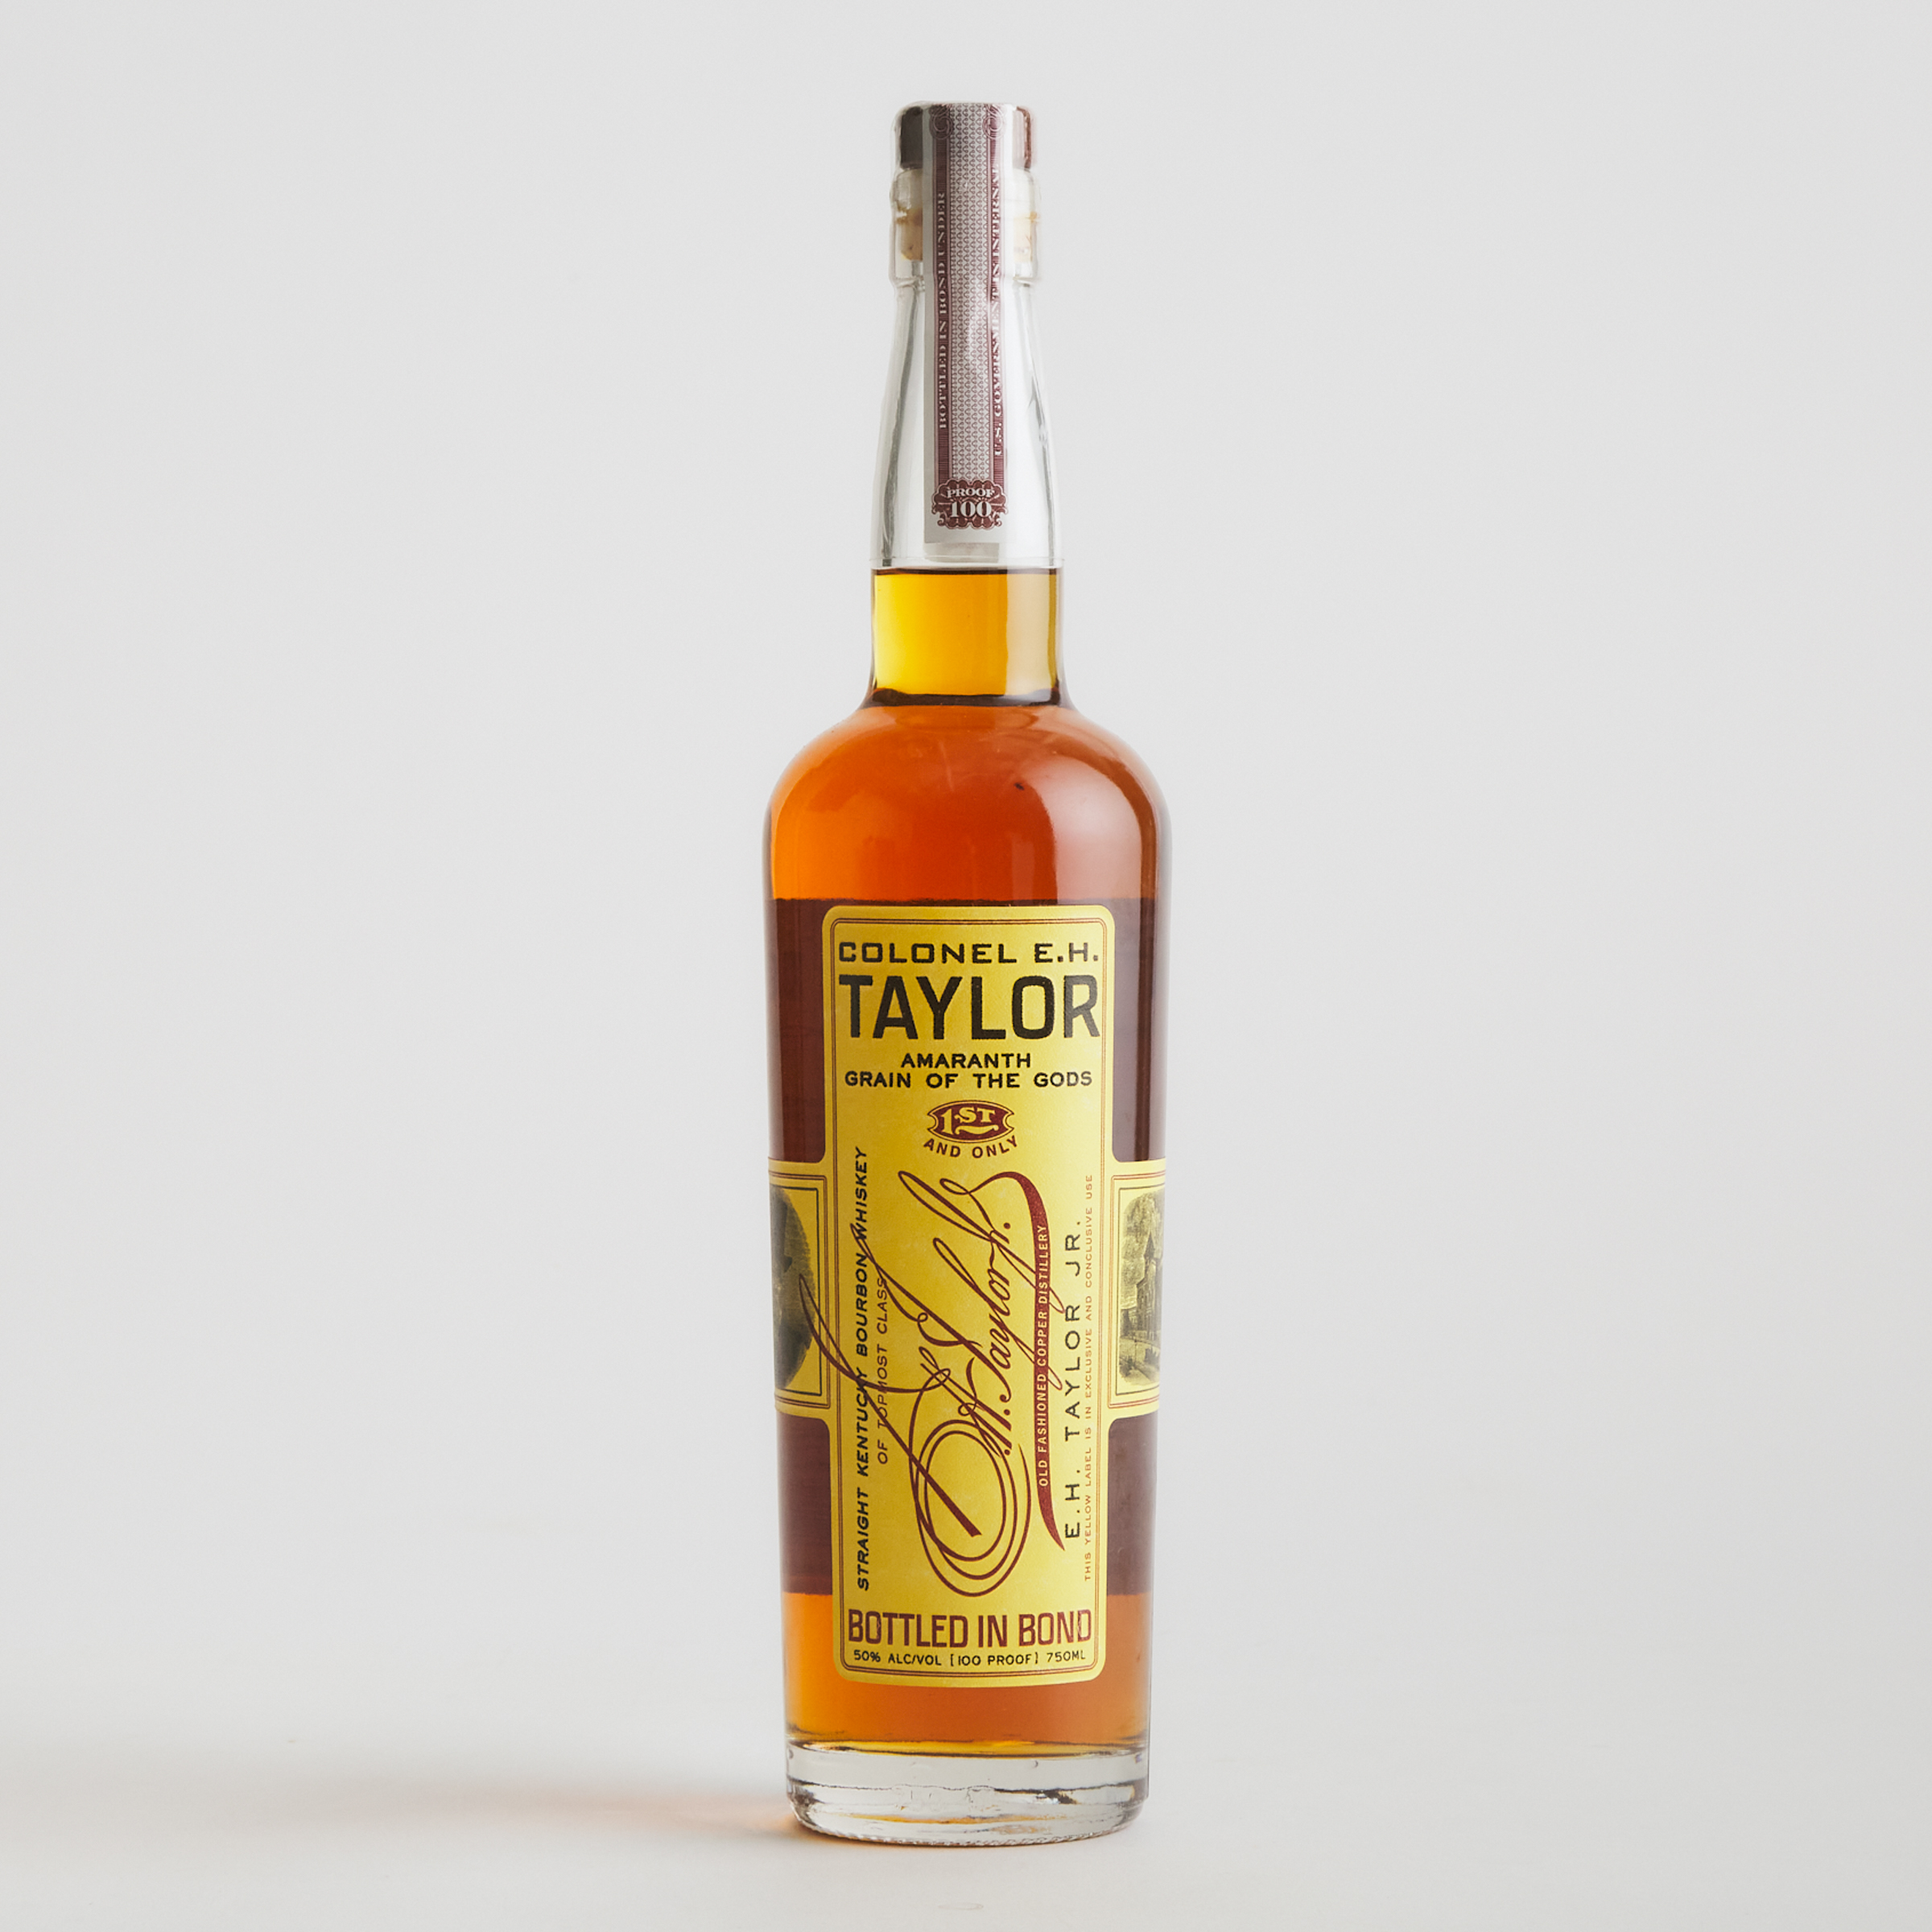 COLONEL E.H. TAYLOR JR. KENTUCKY STRAIGHT BOURBON WHISKEY (ONE 750 ML)